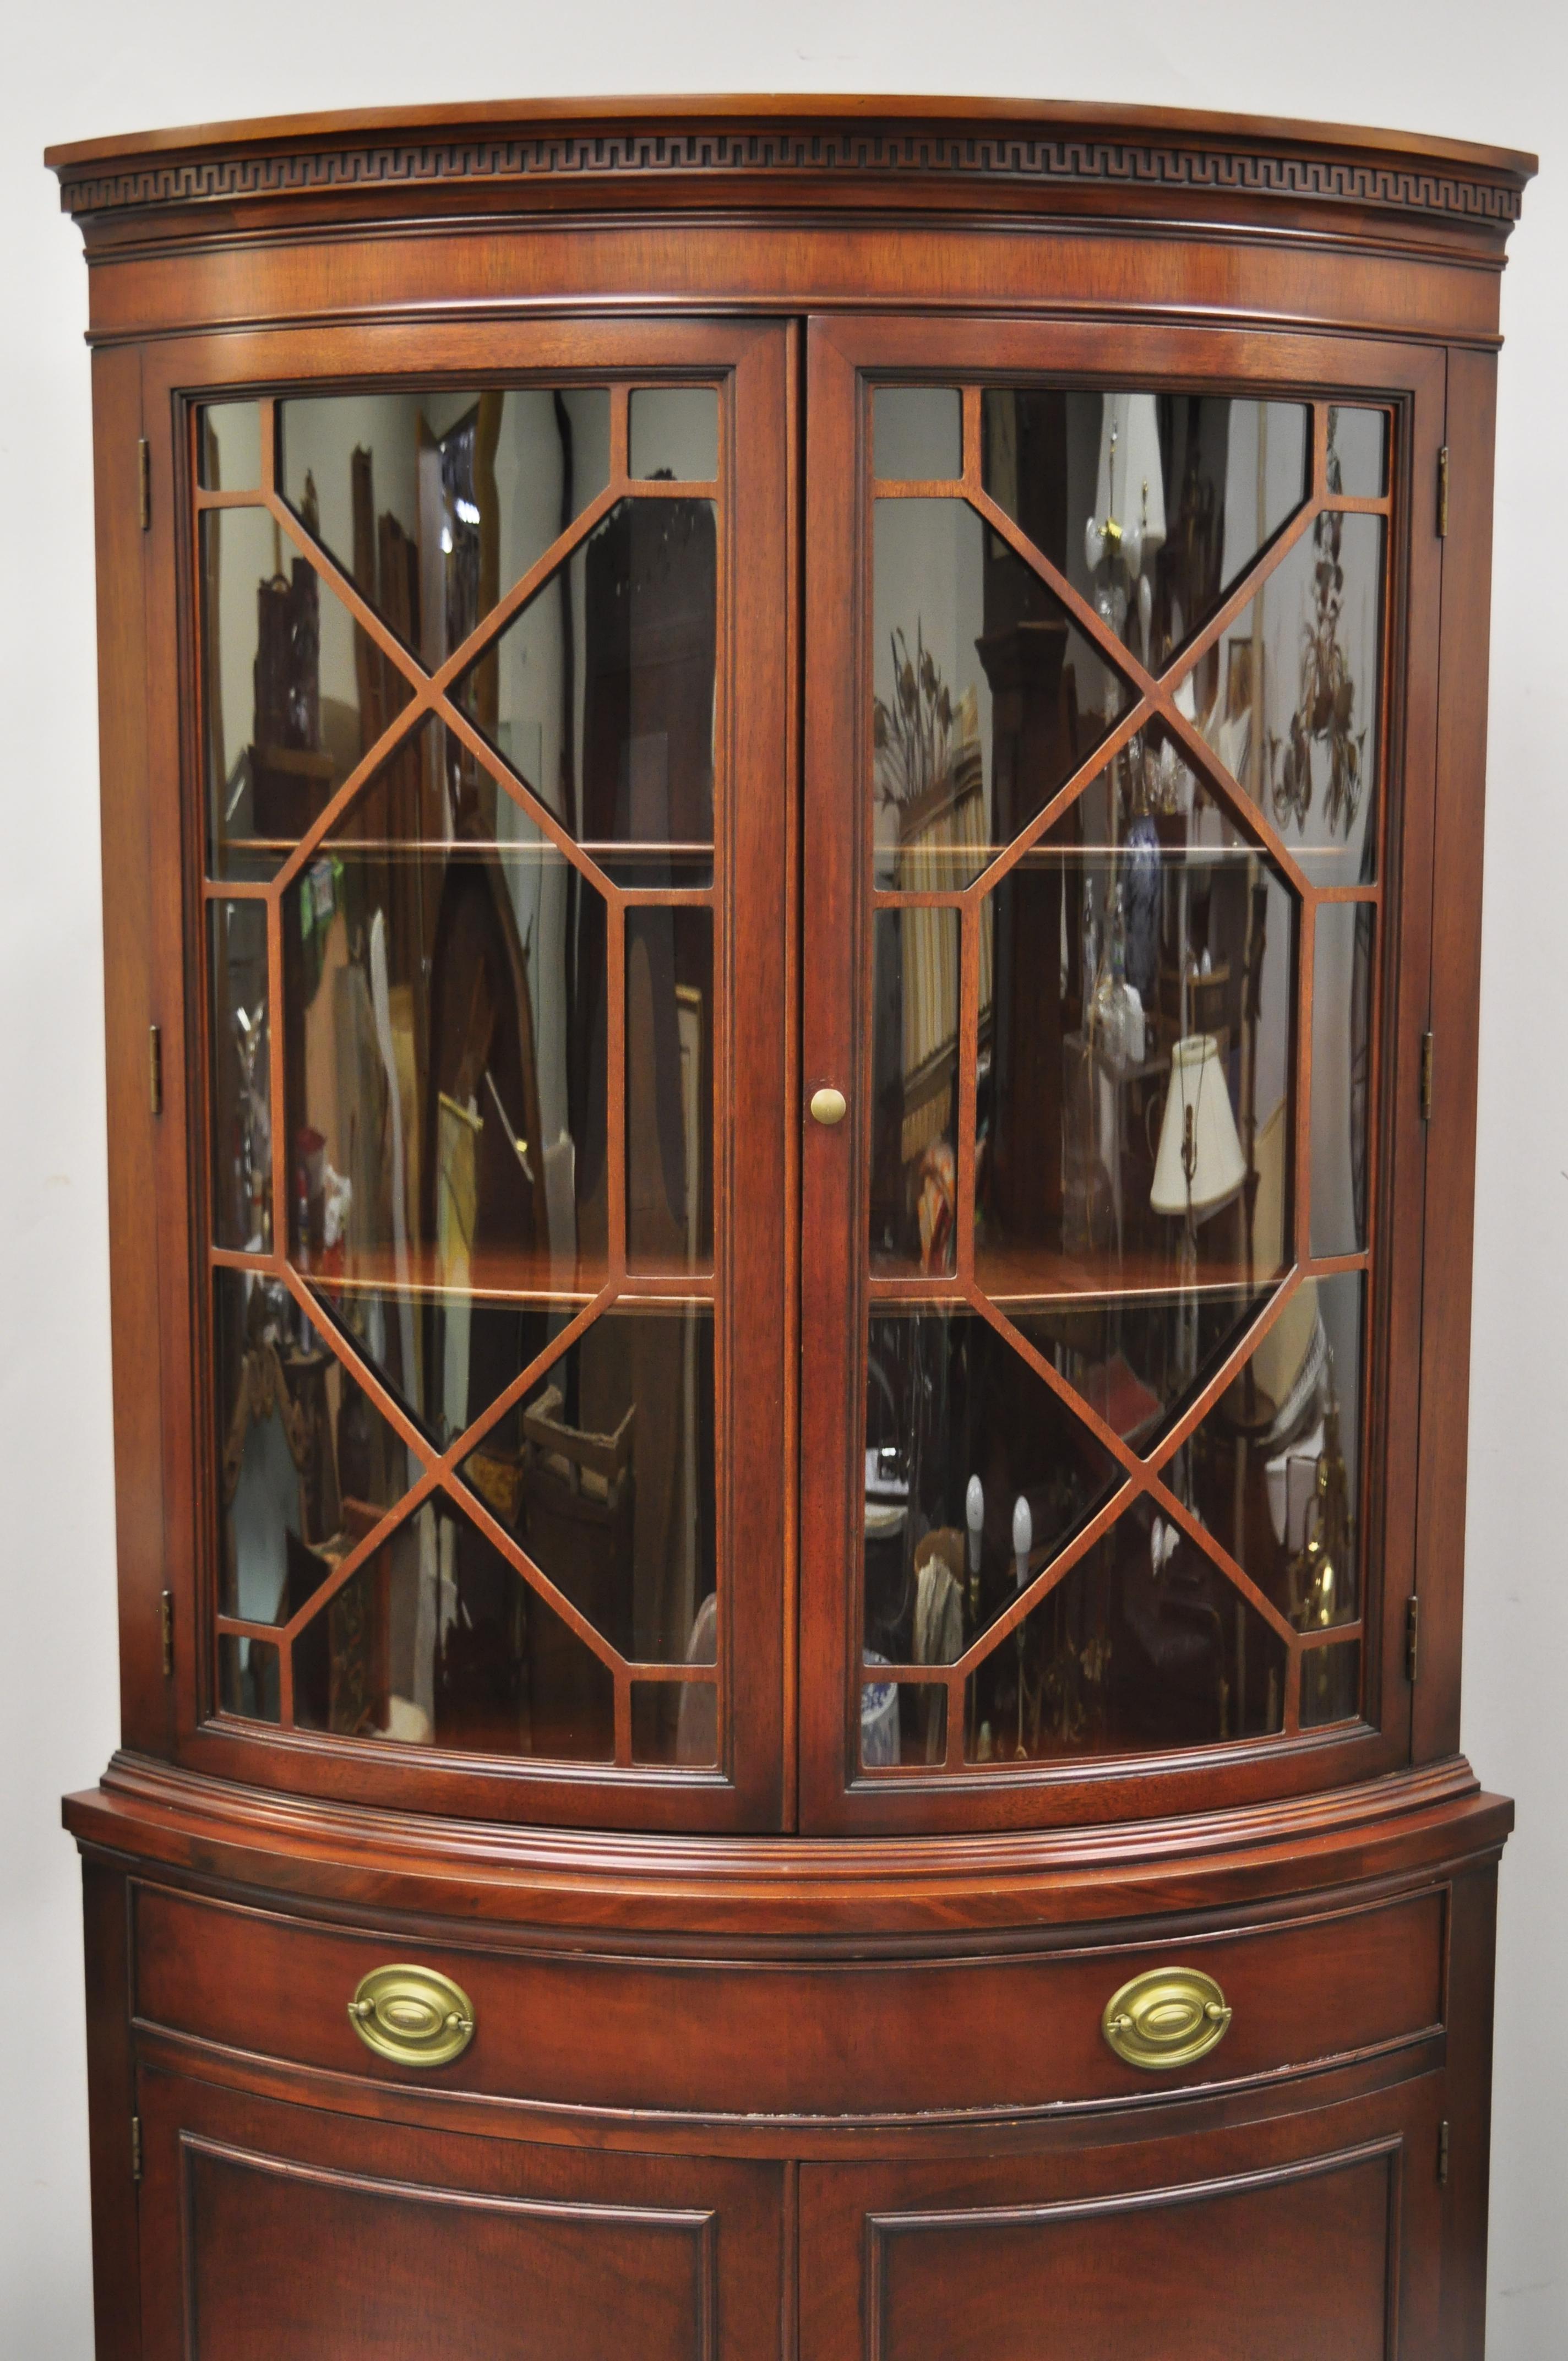 Drexel vintage mahogany bow front glass corner China cabinet Curio display. Item features lattice door panels, bow glass door fronts, beautiful wood grain, 4 swing doors, original stamp, working lock and key, 1 dovetailed drawers, solid brass